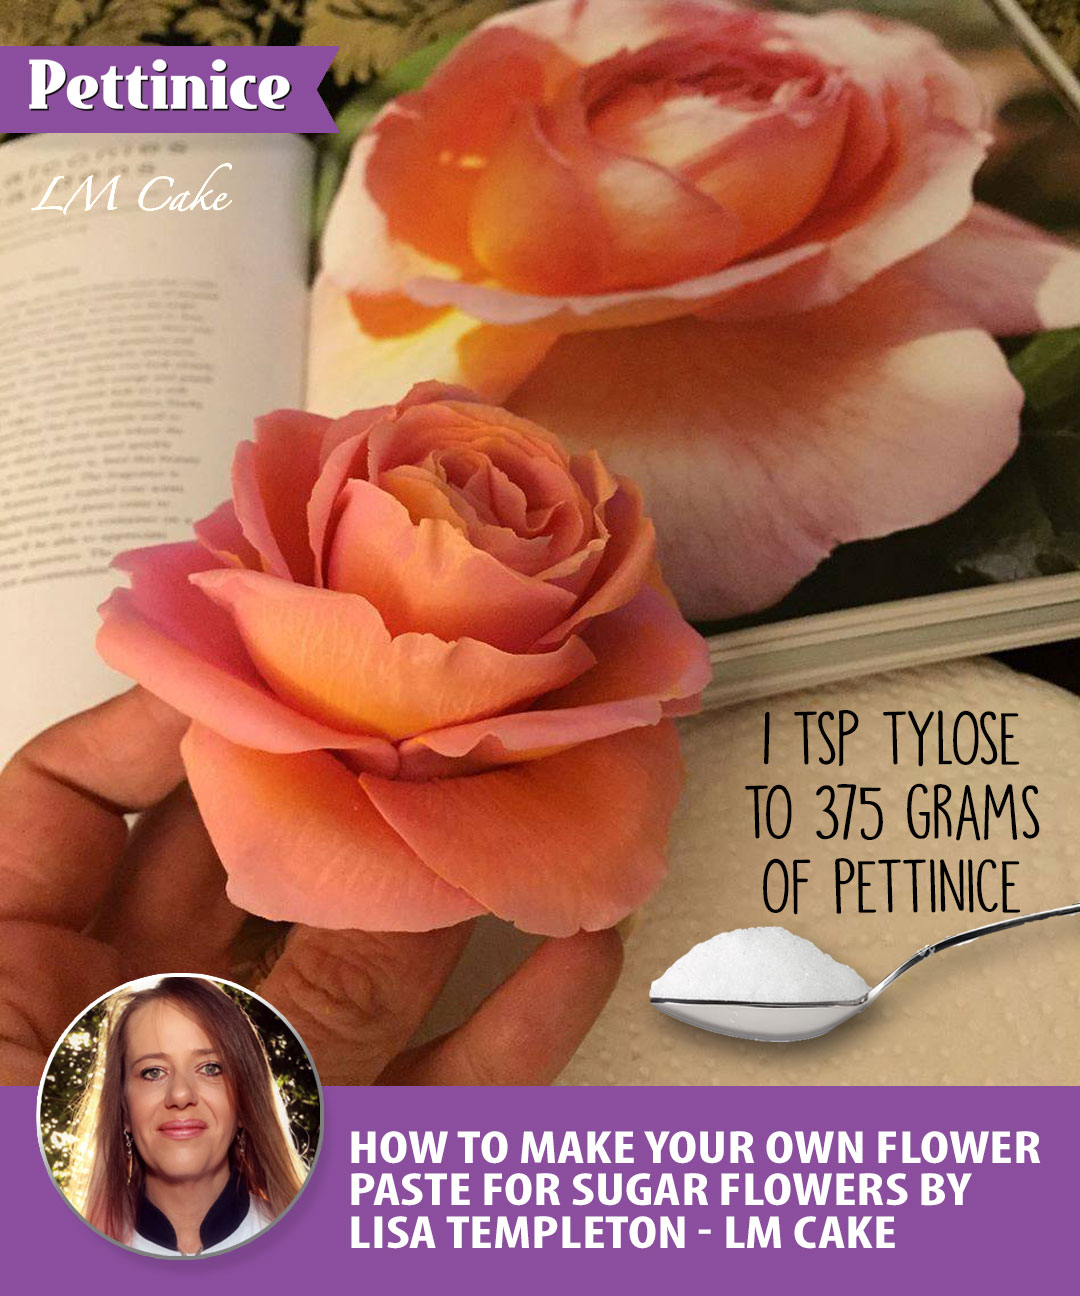 Make your own flower paste by Lisa Templeton